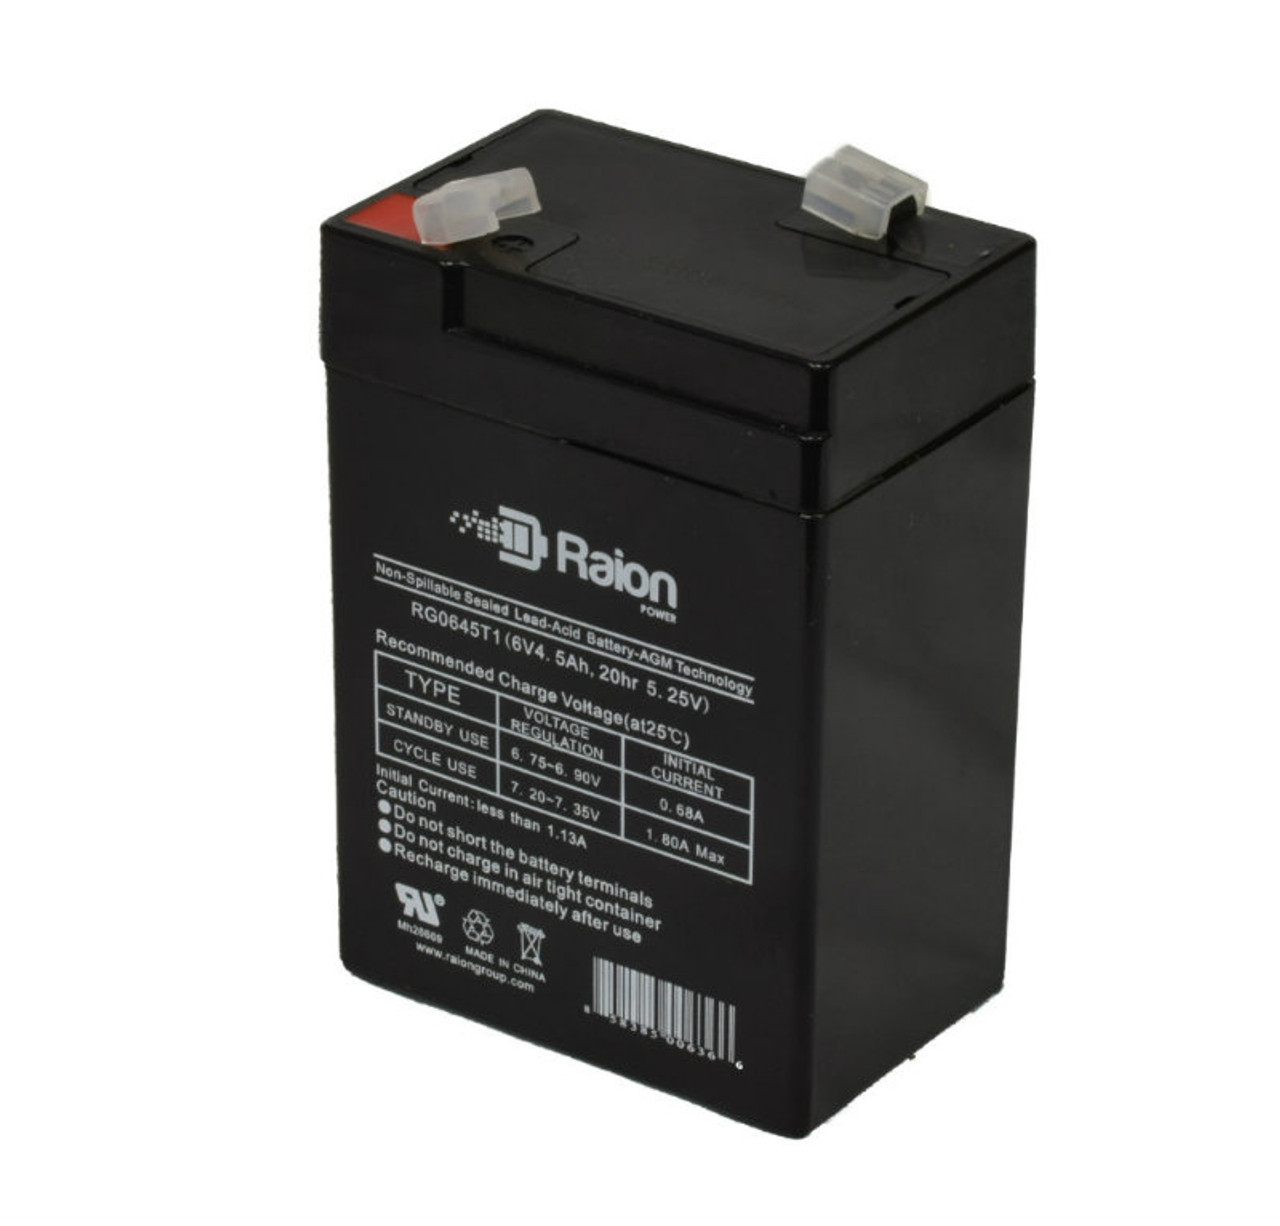 Raion Power RG0645T1 6V 4.5Ah Replacement Battery Cartridge for Gaston GT6-5.6